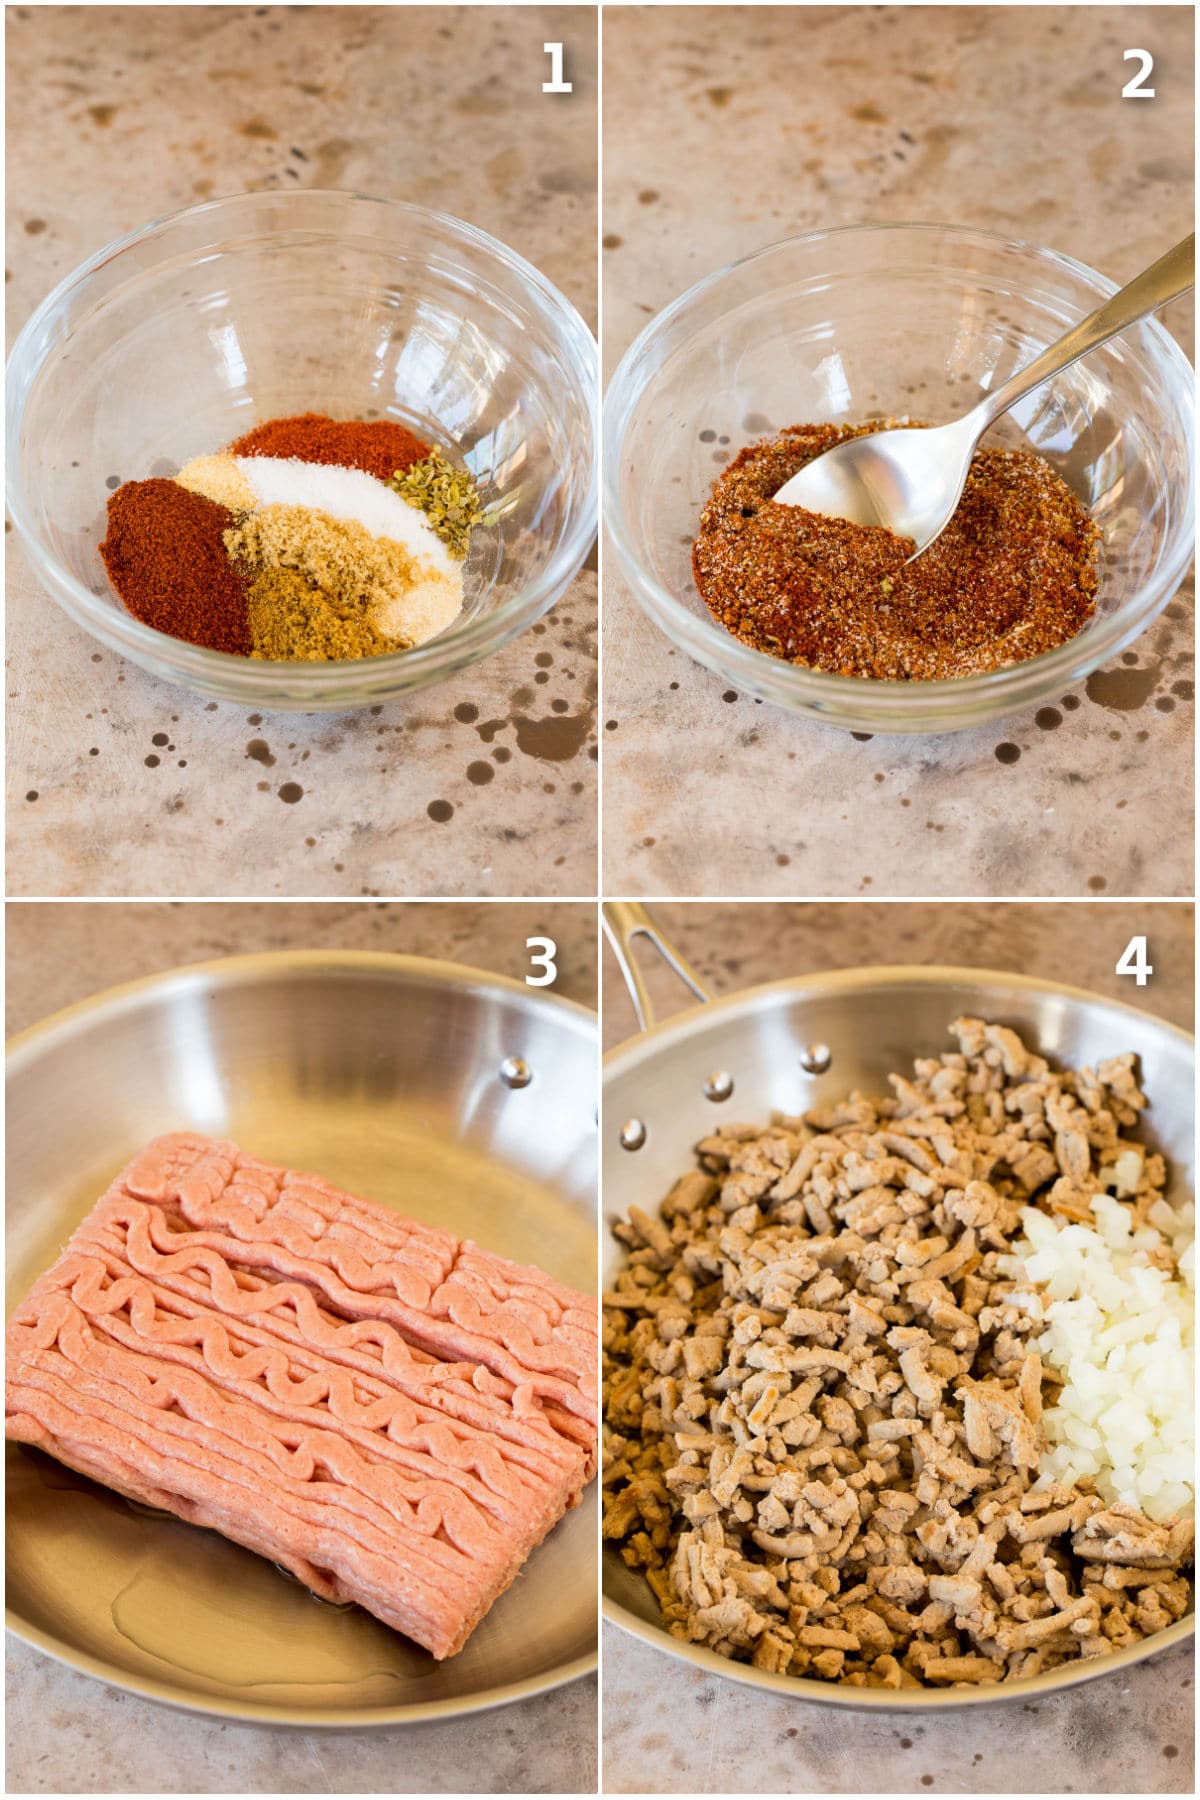 Step by step shots showing how to make spice mix and cook ground turkey.